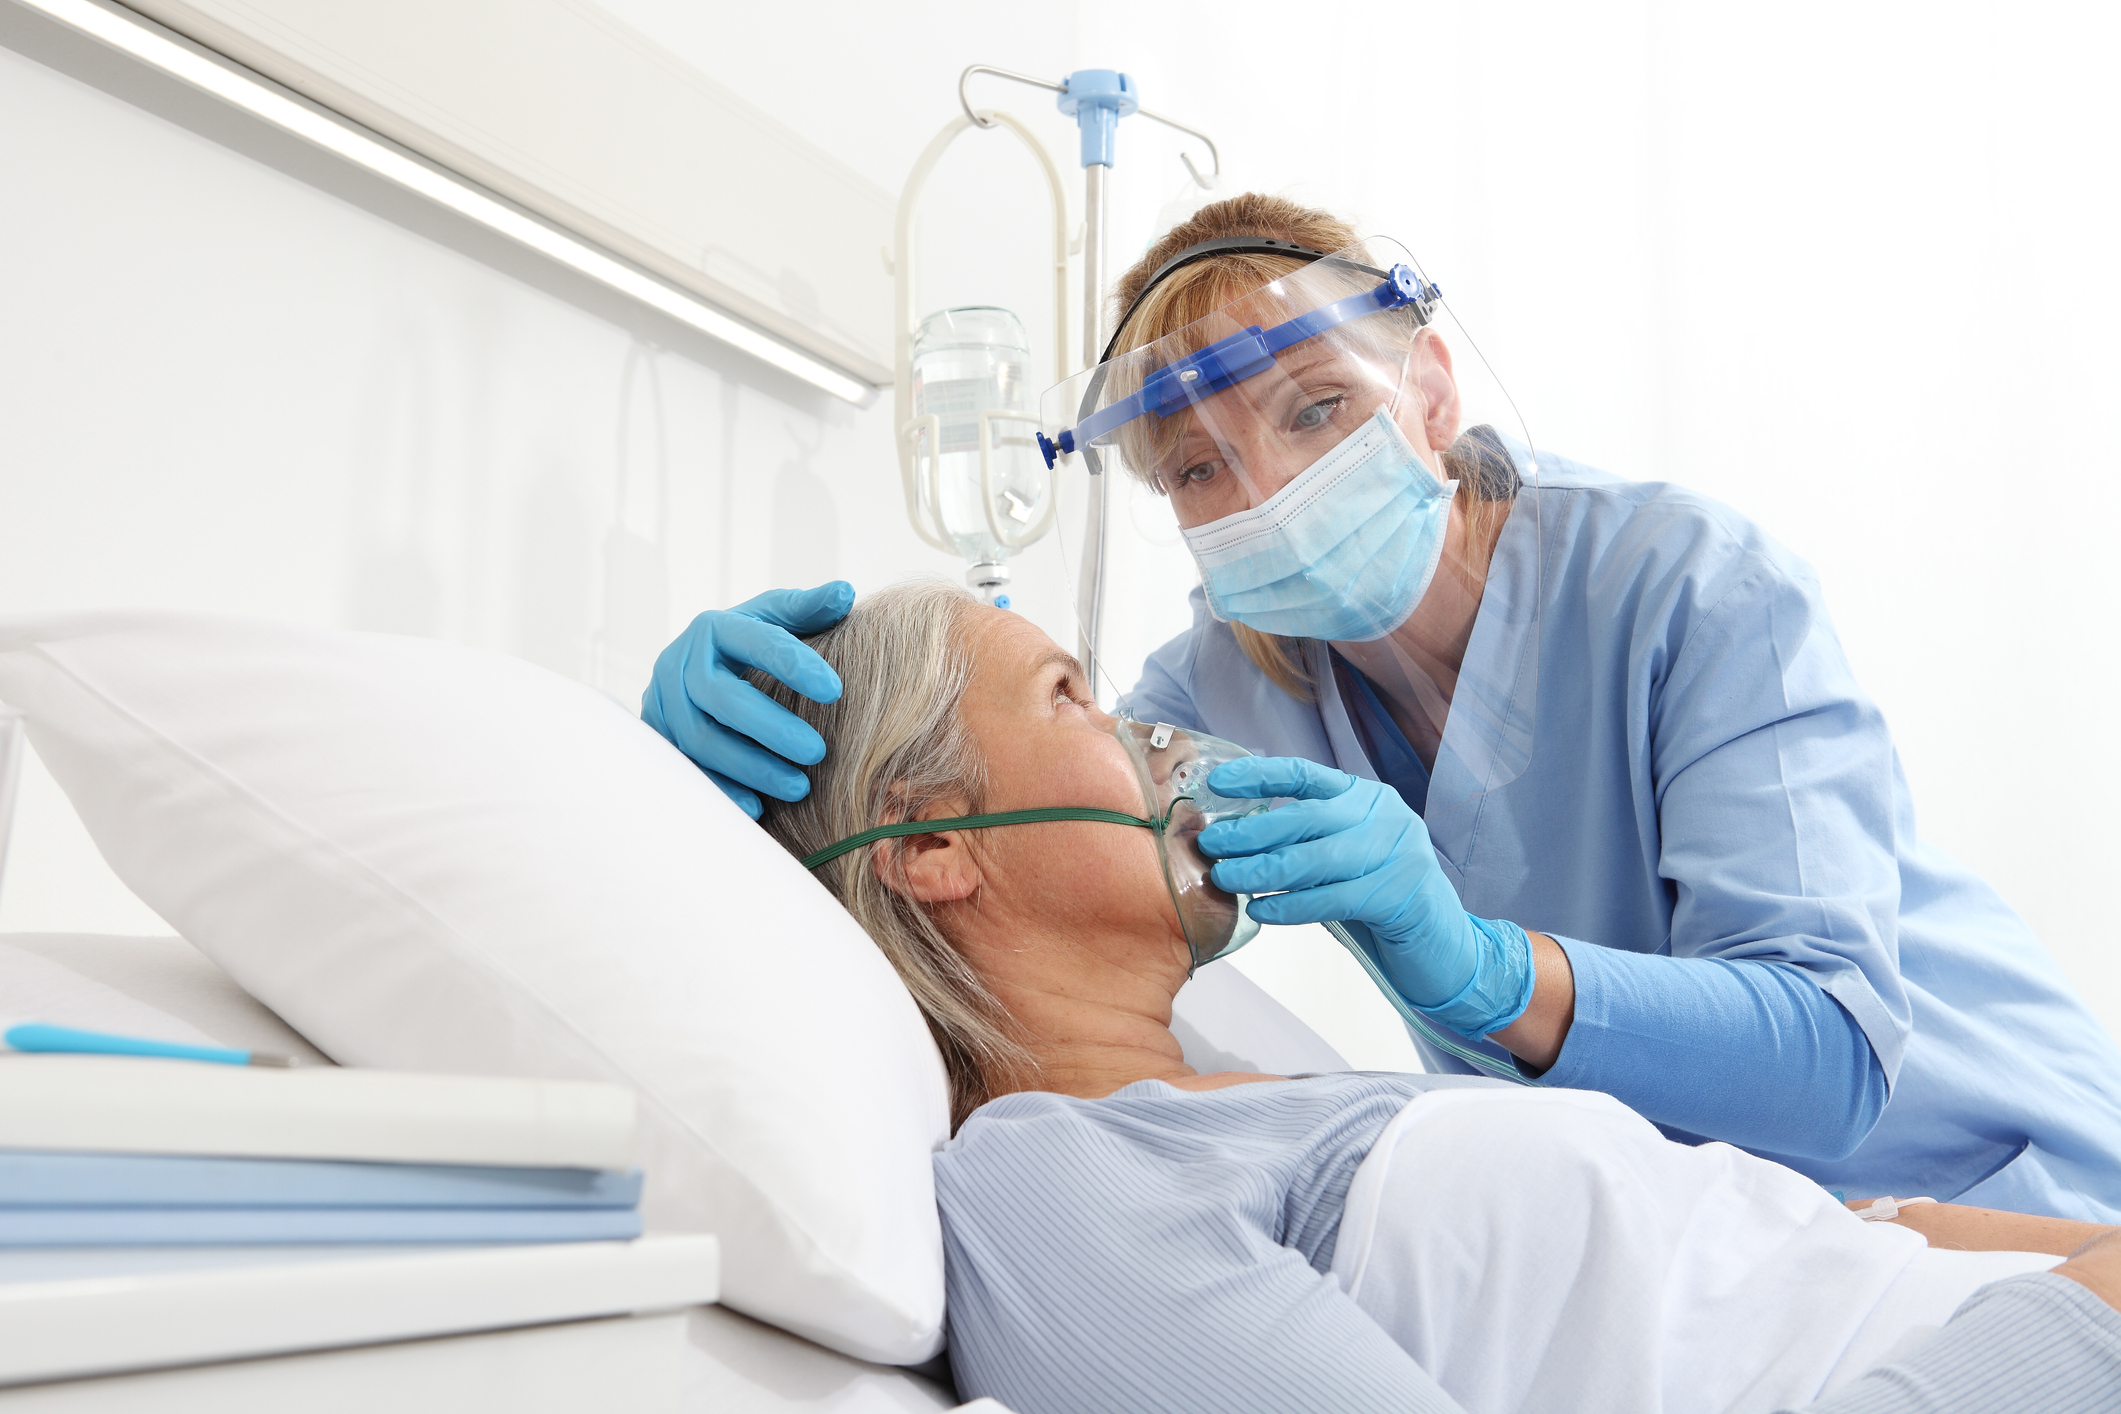 Respiratory therapist treating a patient